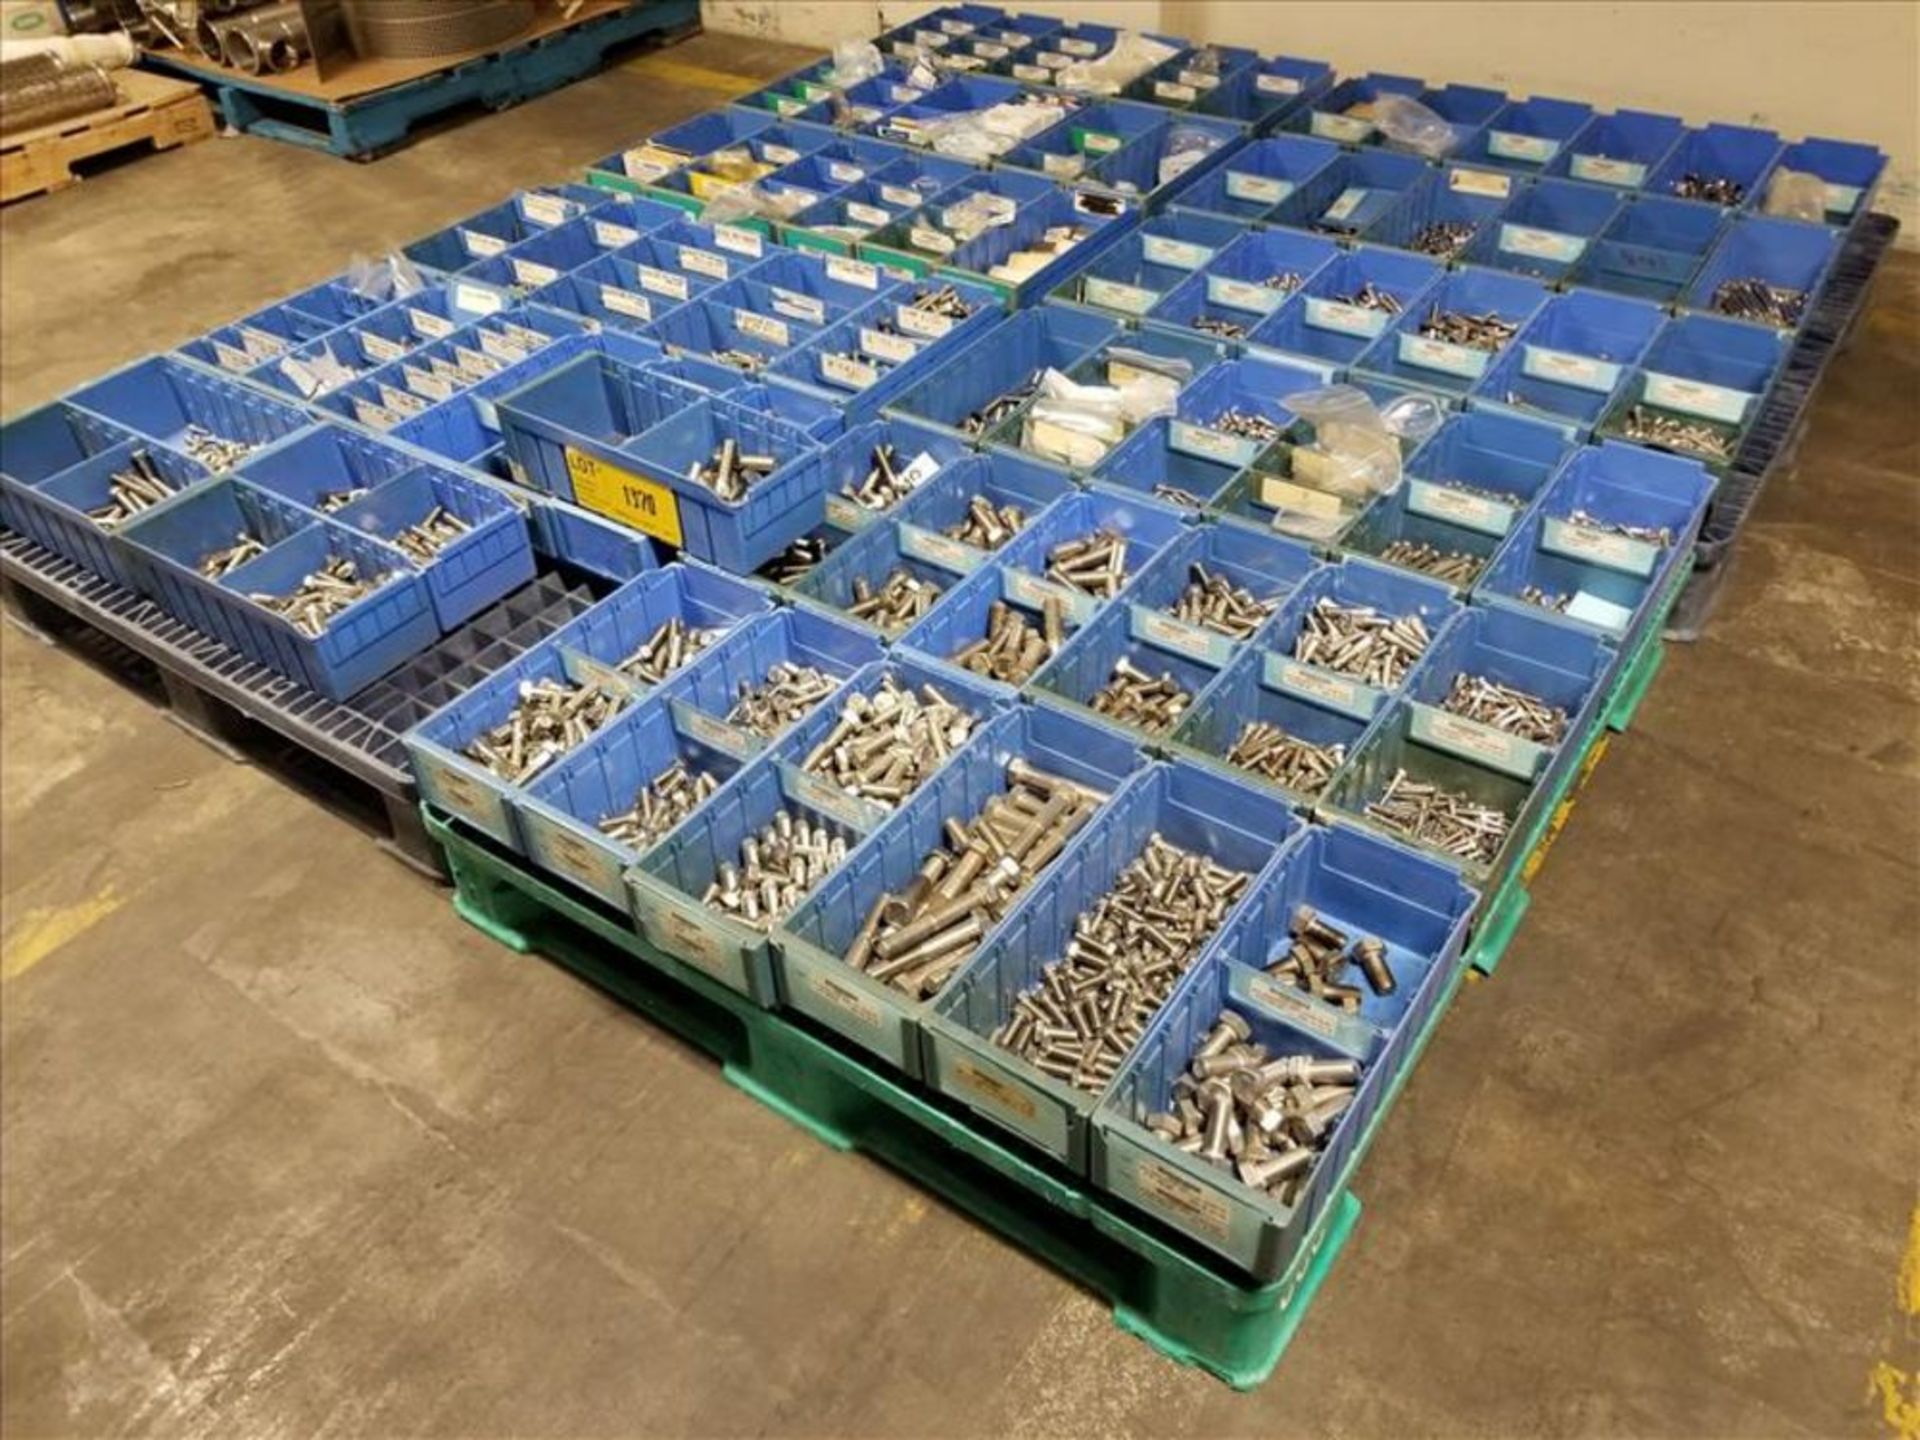 Lot of 316/340 Stainless Nuts, Bolts, Washers (4 Pallets) [Across from 1st Flr Cage Area] - Image 2 of 4